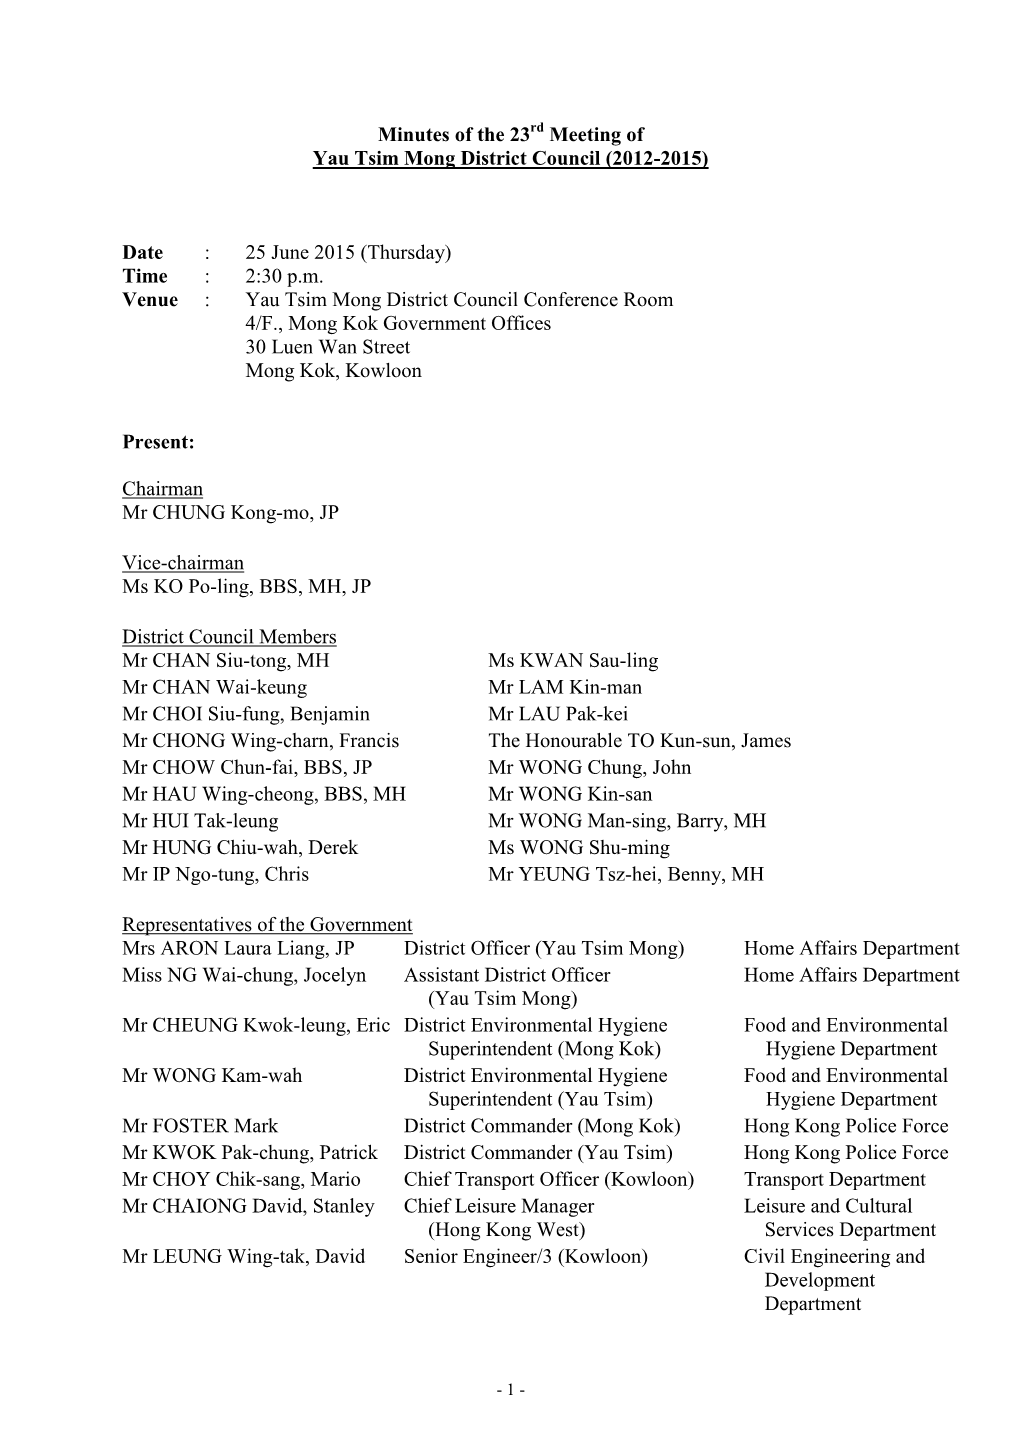 Minutes of the 23 Meeting of Yau Tsim Mong District Council (2012-2015